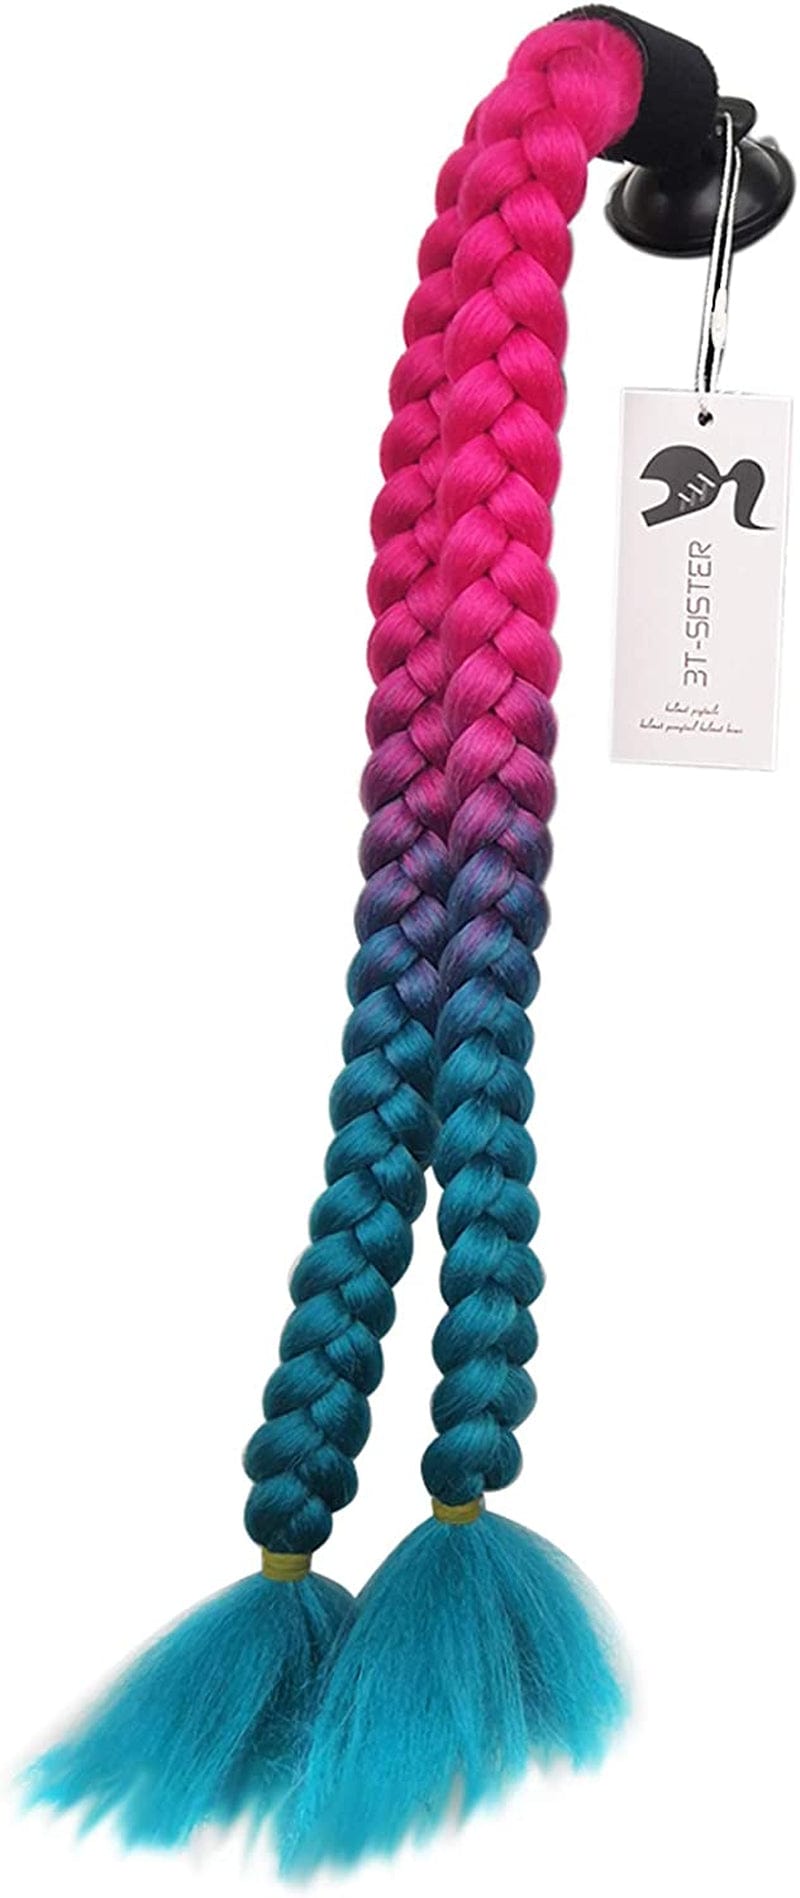 3T-SISTER Pigtails Accessory for Helmet Pigtails Ponytail Braids Hair for Motorcycle Bicycle Batting Skate Helmet or Other Helmets 2 Braids Together 24Inch /Many Colors (Helmet Not Included) Sporting Goods > Outdoor Recreation > Cycling > Cycling Apparel & Accessories > Bicycle Helmets 3T-SISTER Cyan  